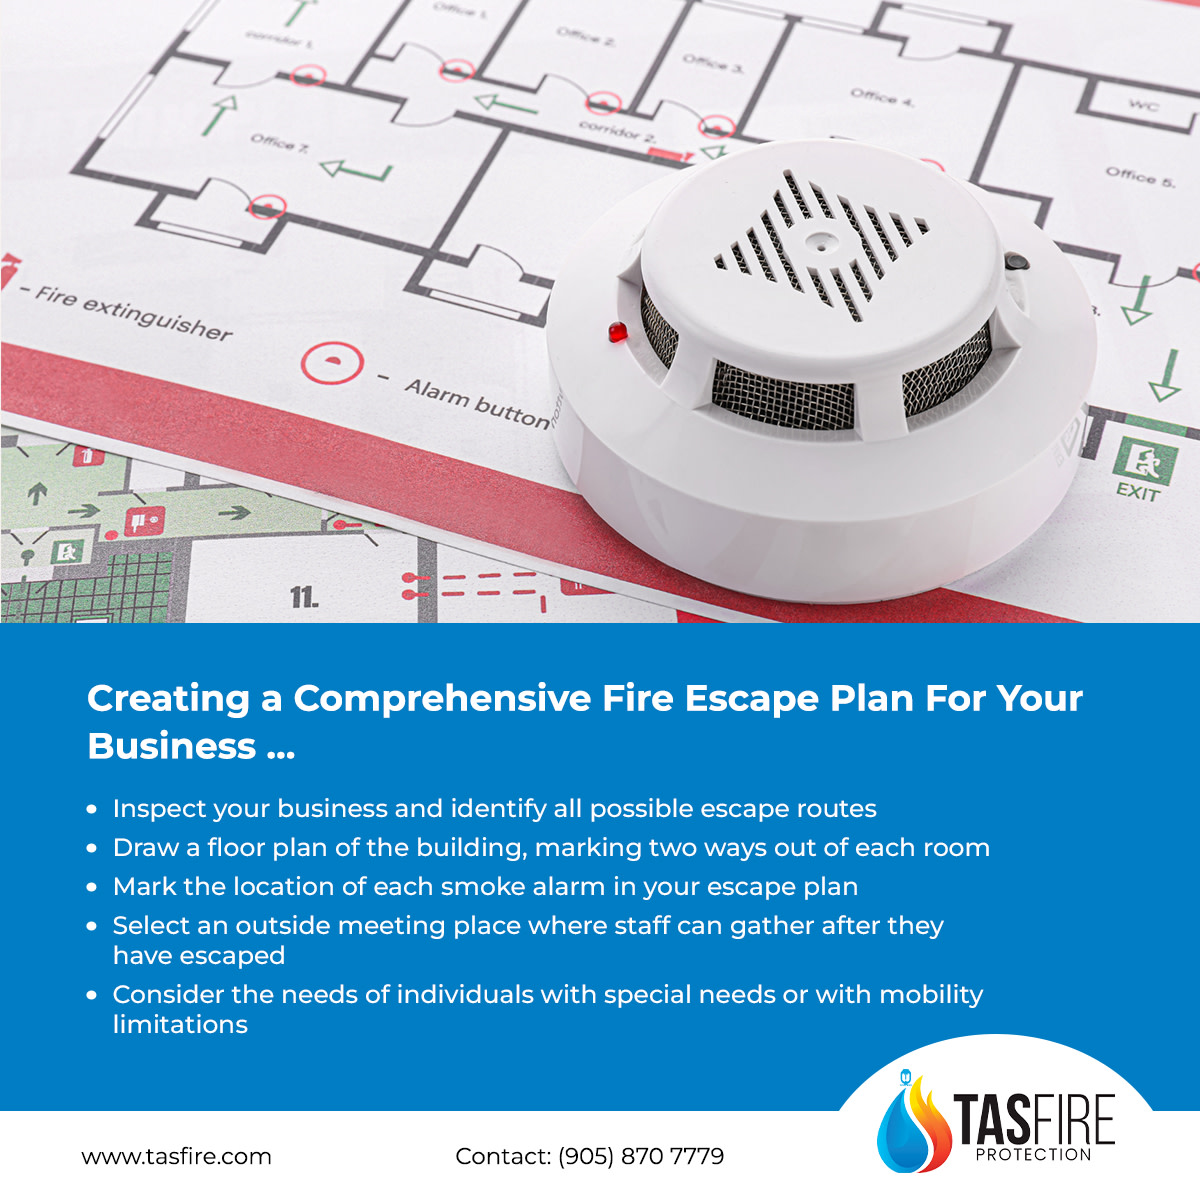 TAS Fire - Creating a Comprehensive Fire Escape Plan For Your Business
LEARN MORE... tasfire.com/creating-a-com…

#fireprotection #fireservices #fireprotectionservices #firesuppression #firealarms #sprinklersystems #fireextinguishers